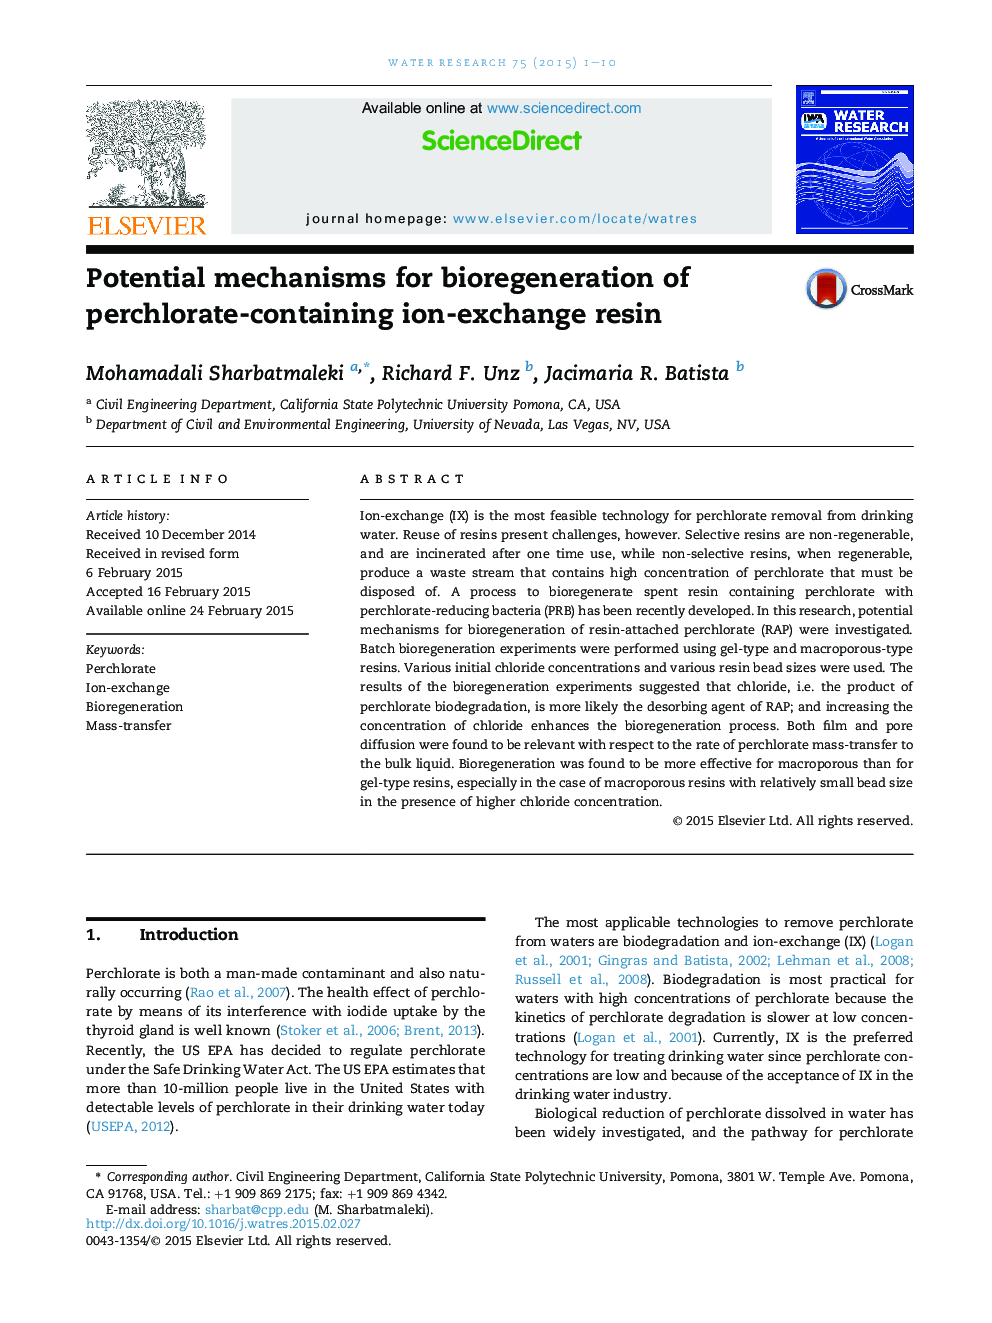 Potential mechanisms for bioregeneration of perchlorate-containing ion-exchange resin